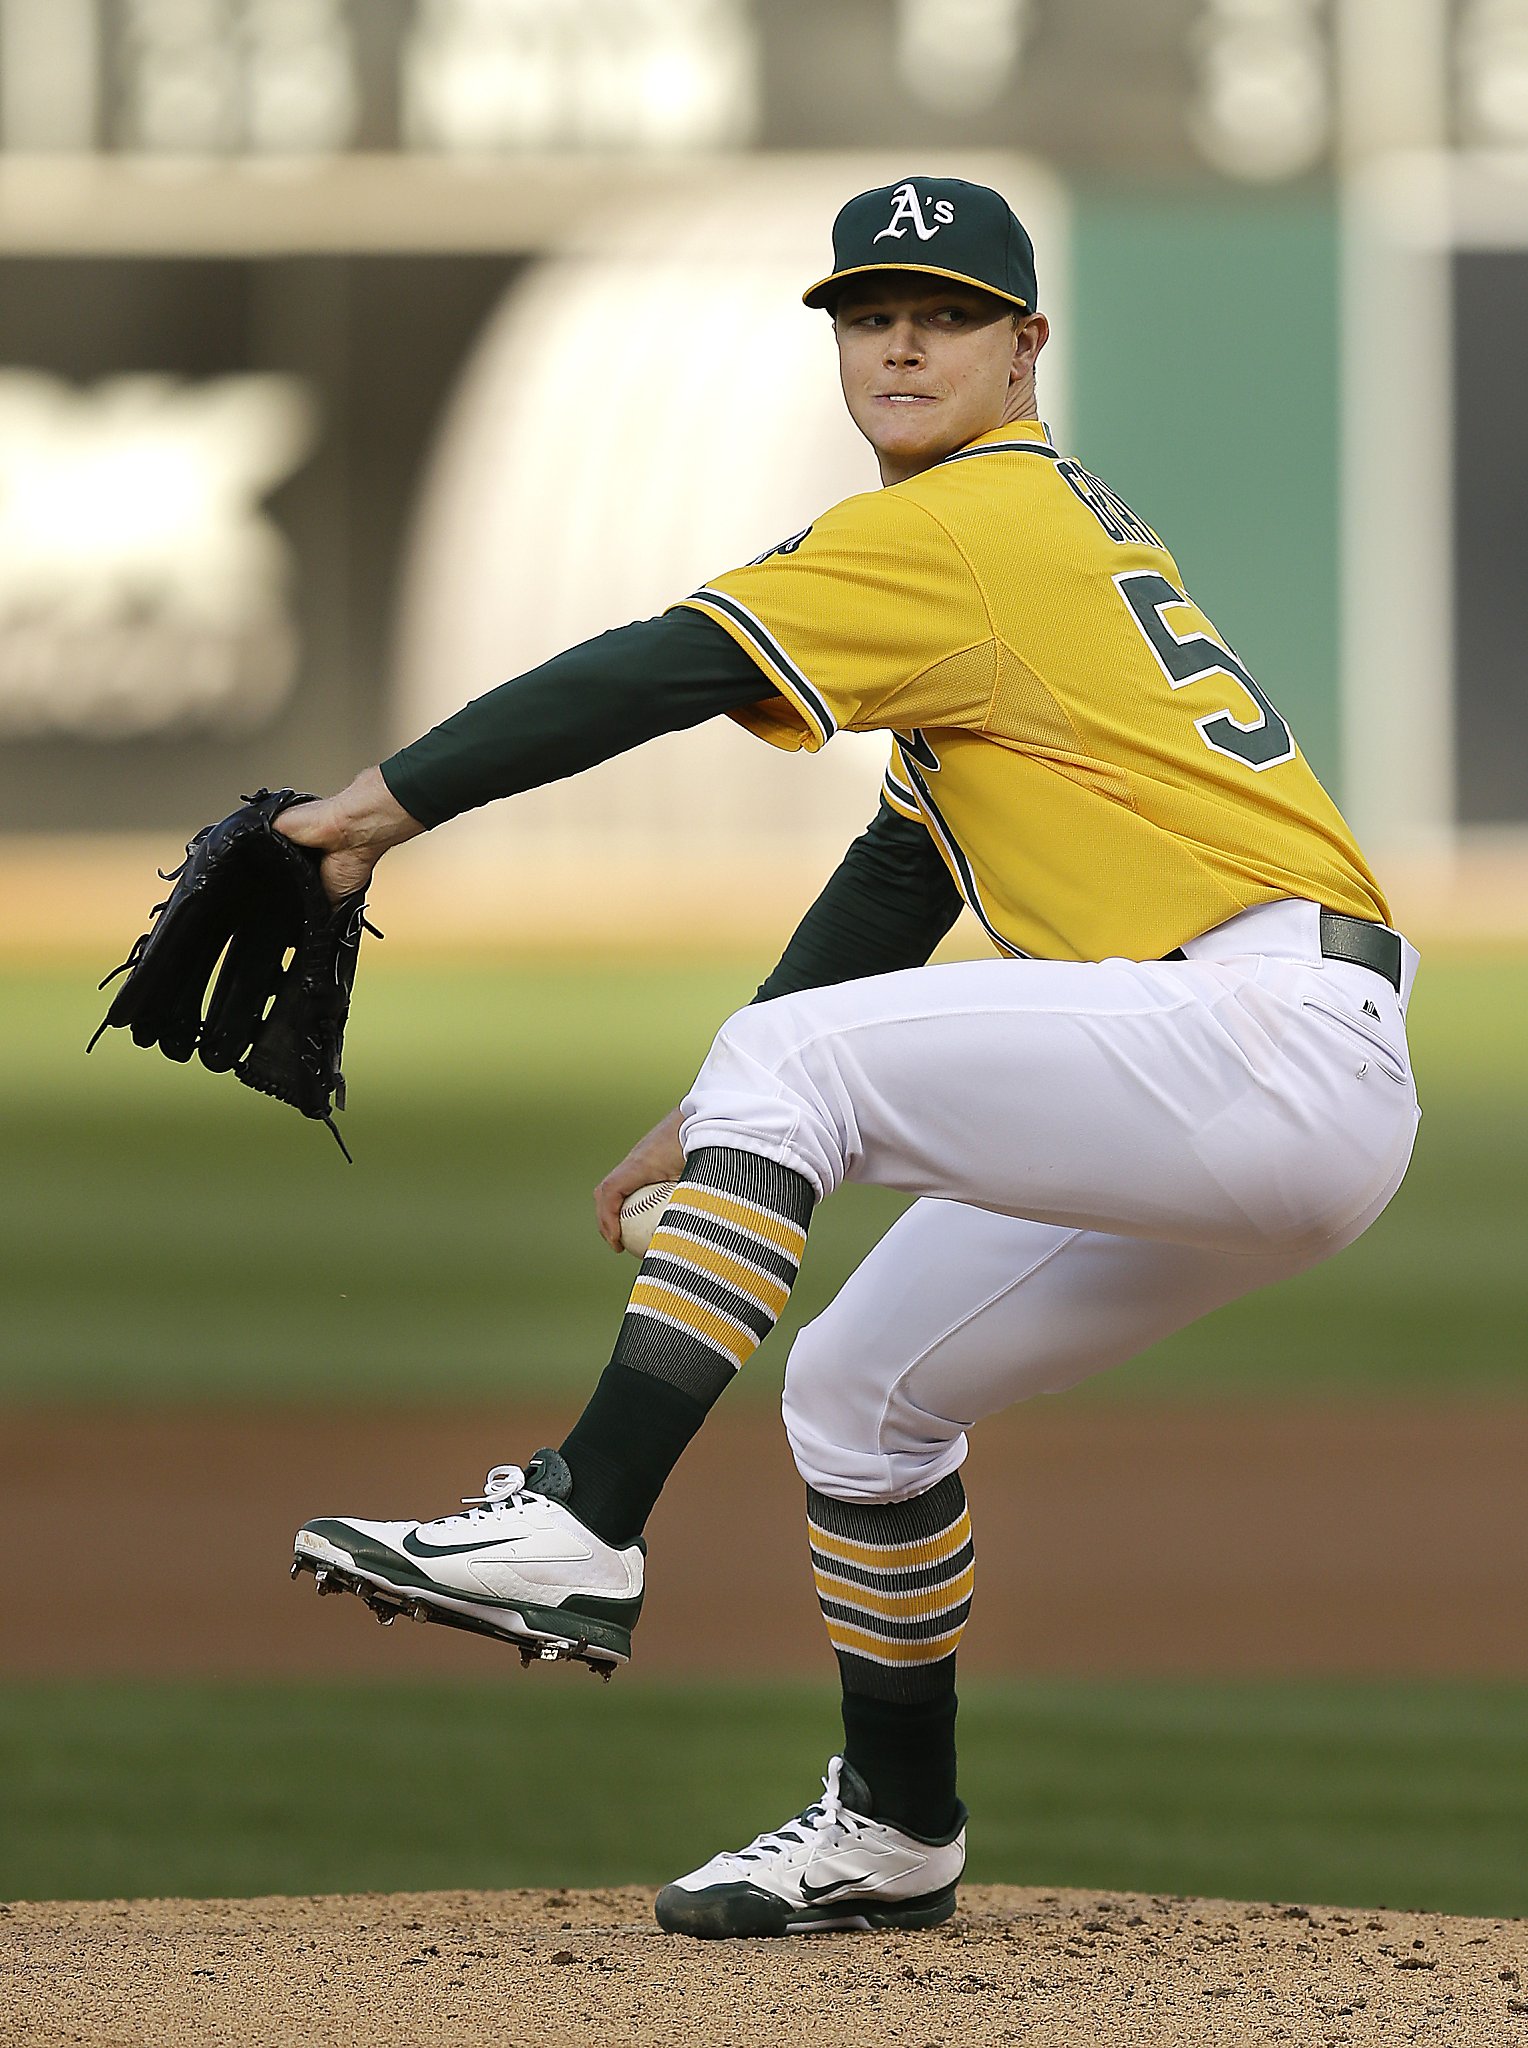 Sonny Gray helps A’s tame Yankees 6-2 - SFGate